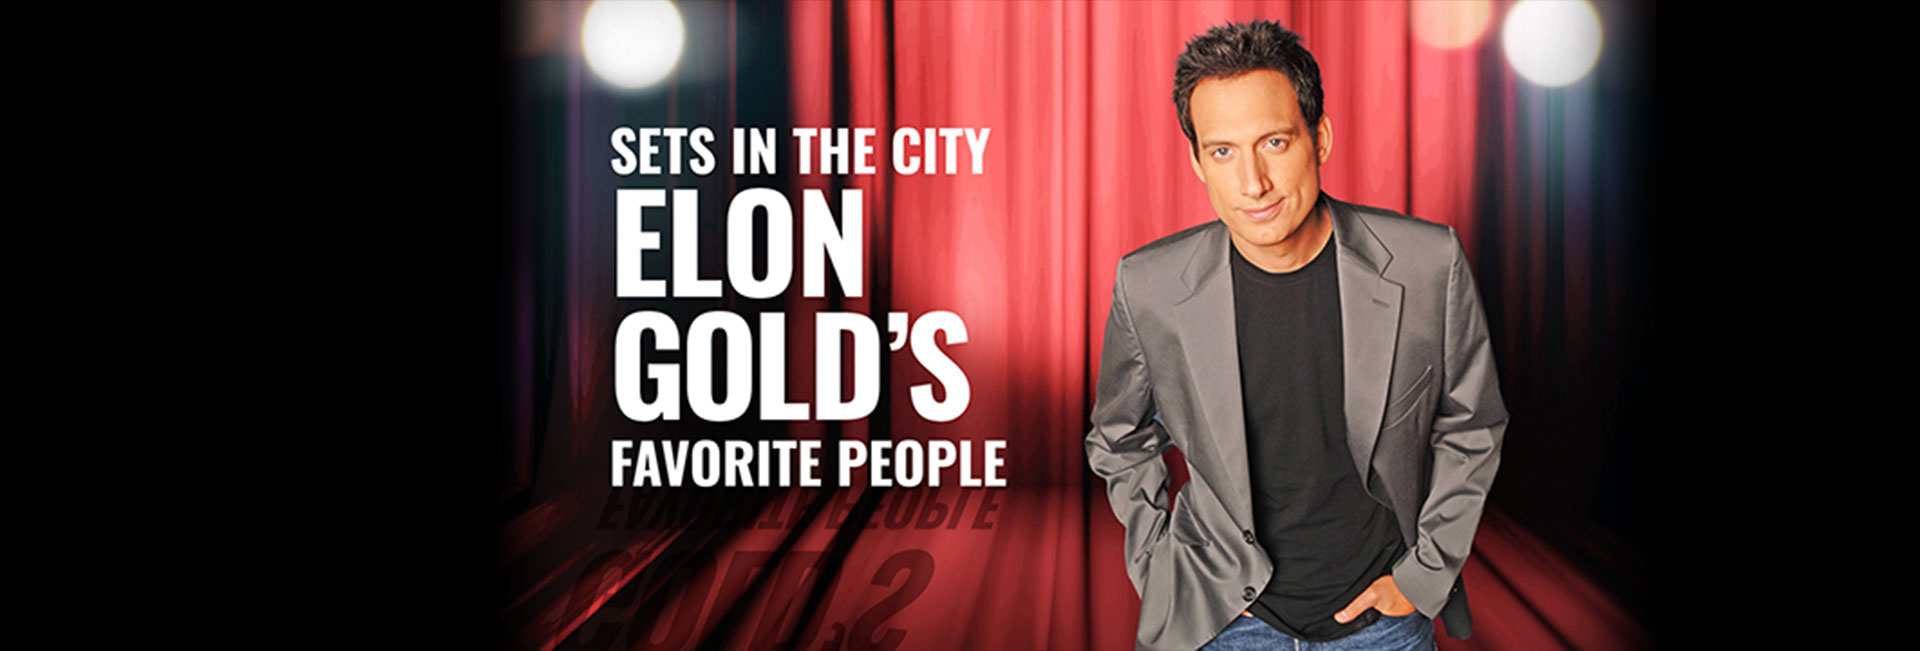 Sets In The City: Elon Gold’s Favorite People – FULL SPECIAL